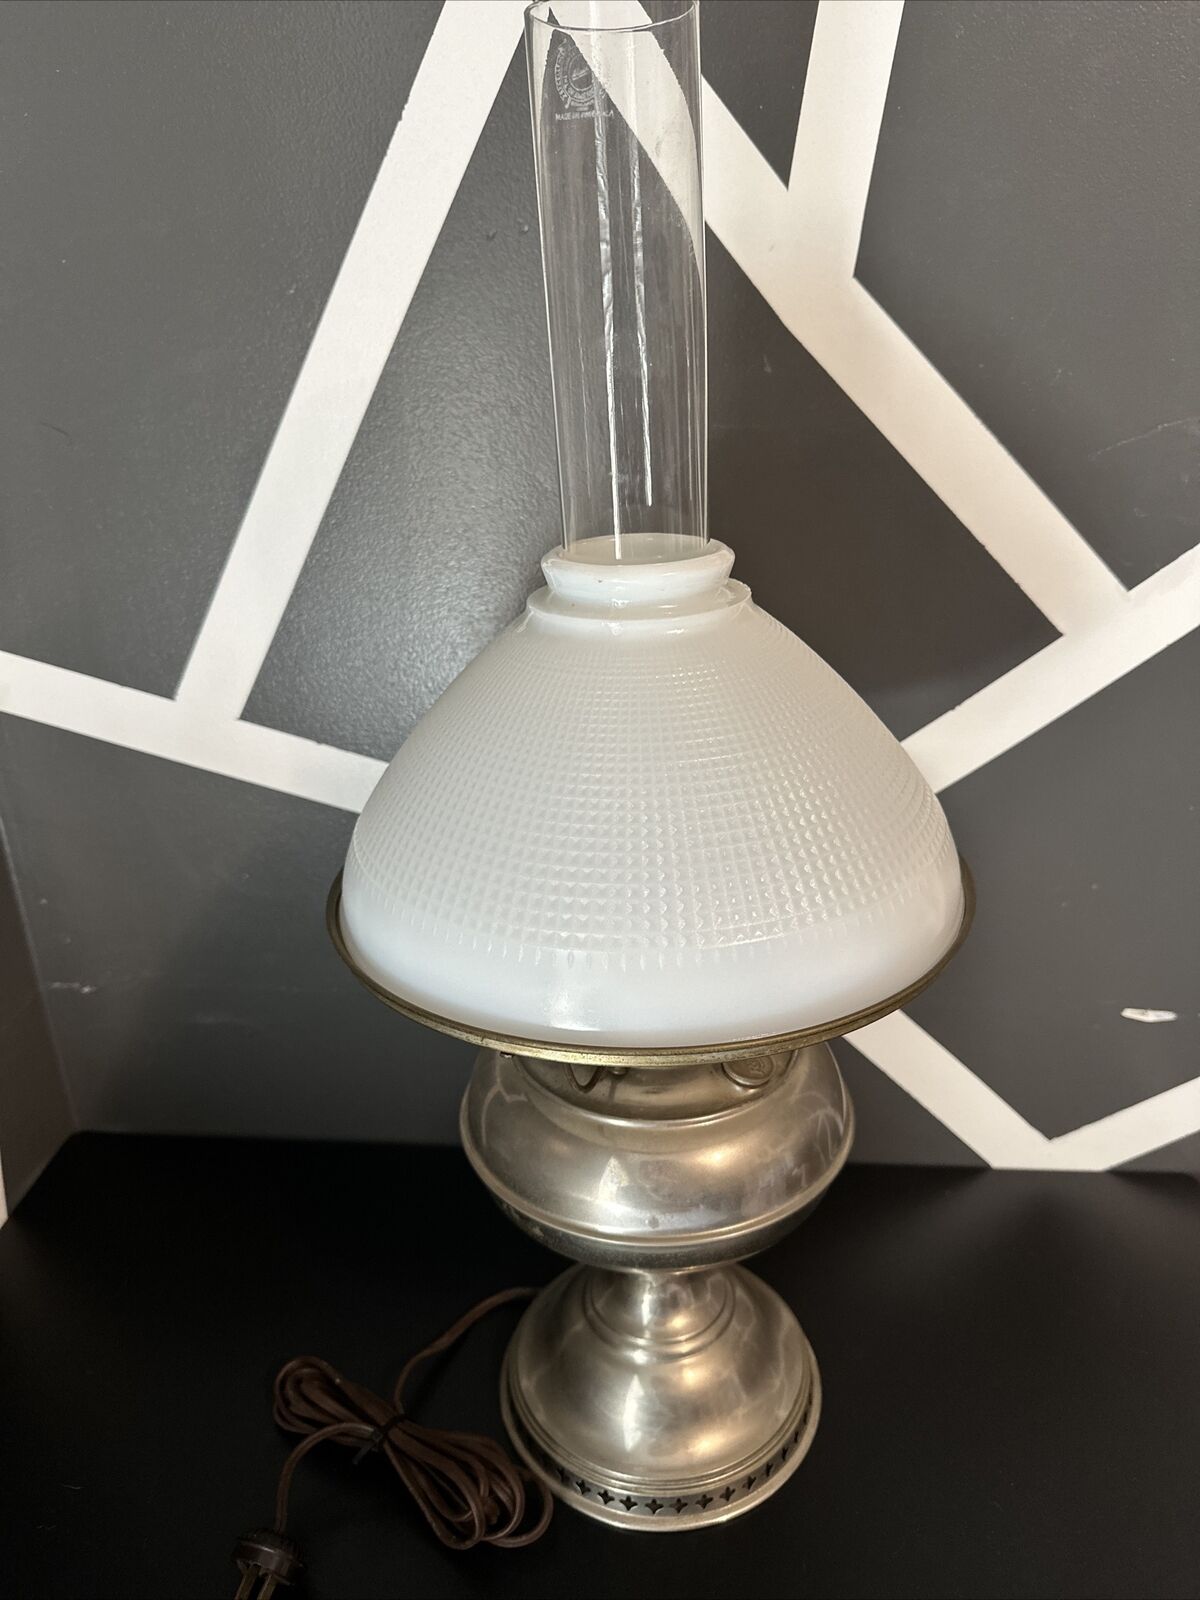 Antique Original Rayo Oil Lamp Electrified White Glass Shade With Bulb